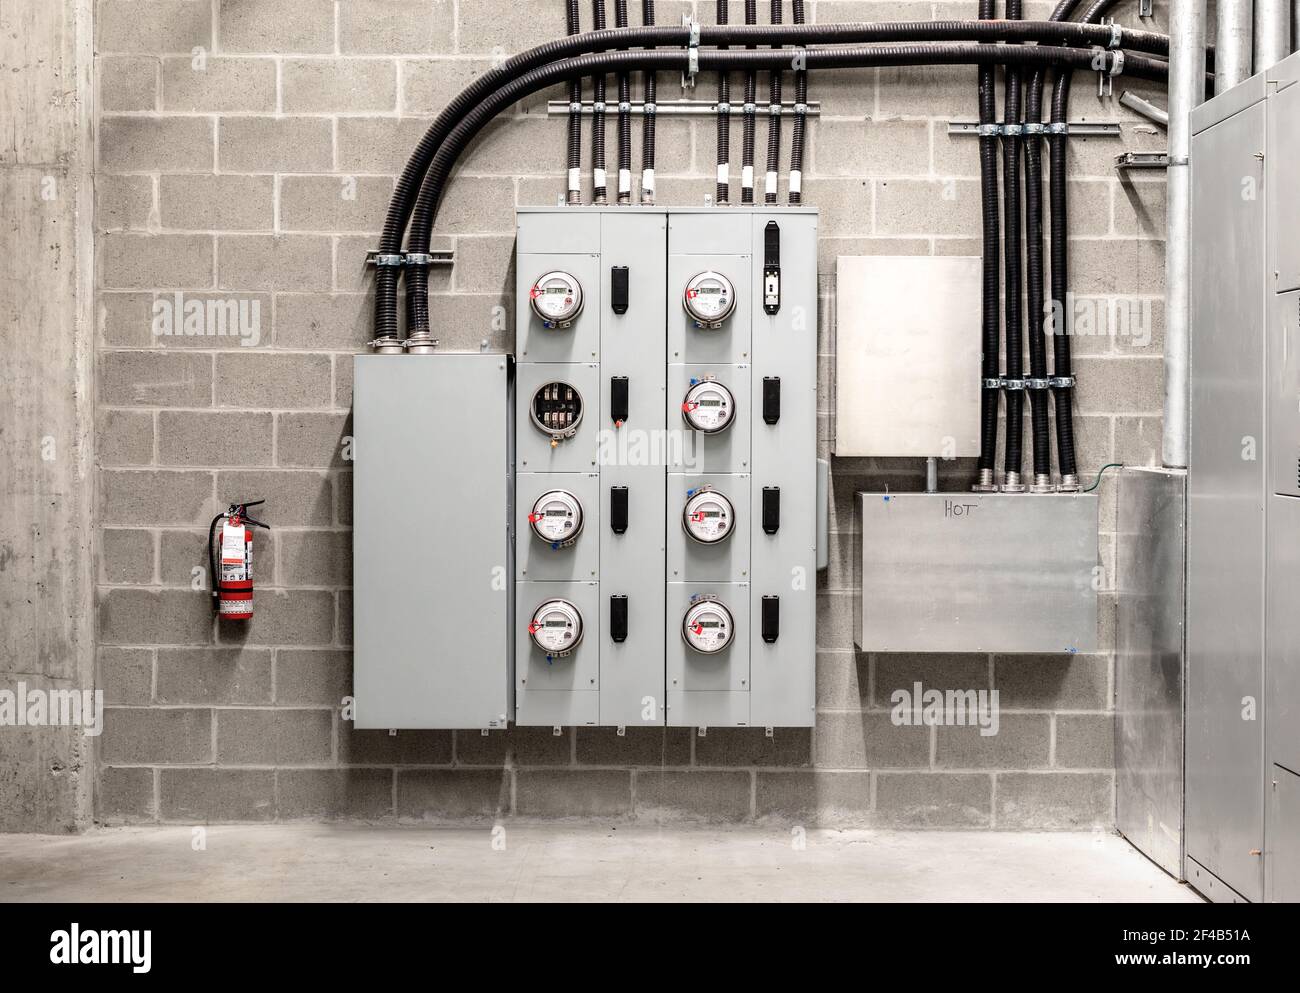 Electrical room with multiple smart meters, cabinets, wiring and fire extinguisher. Below-grade service room of 4 story strata building with residenti Stock Photo